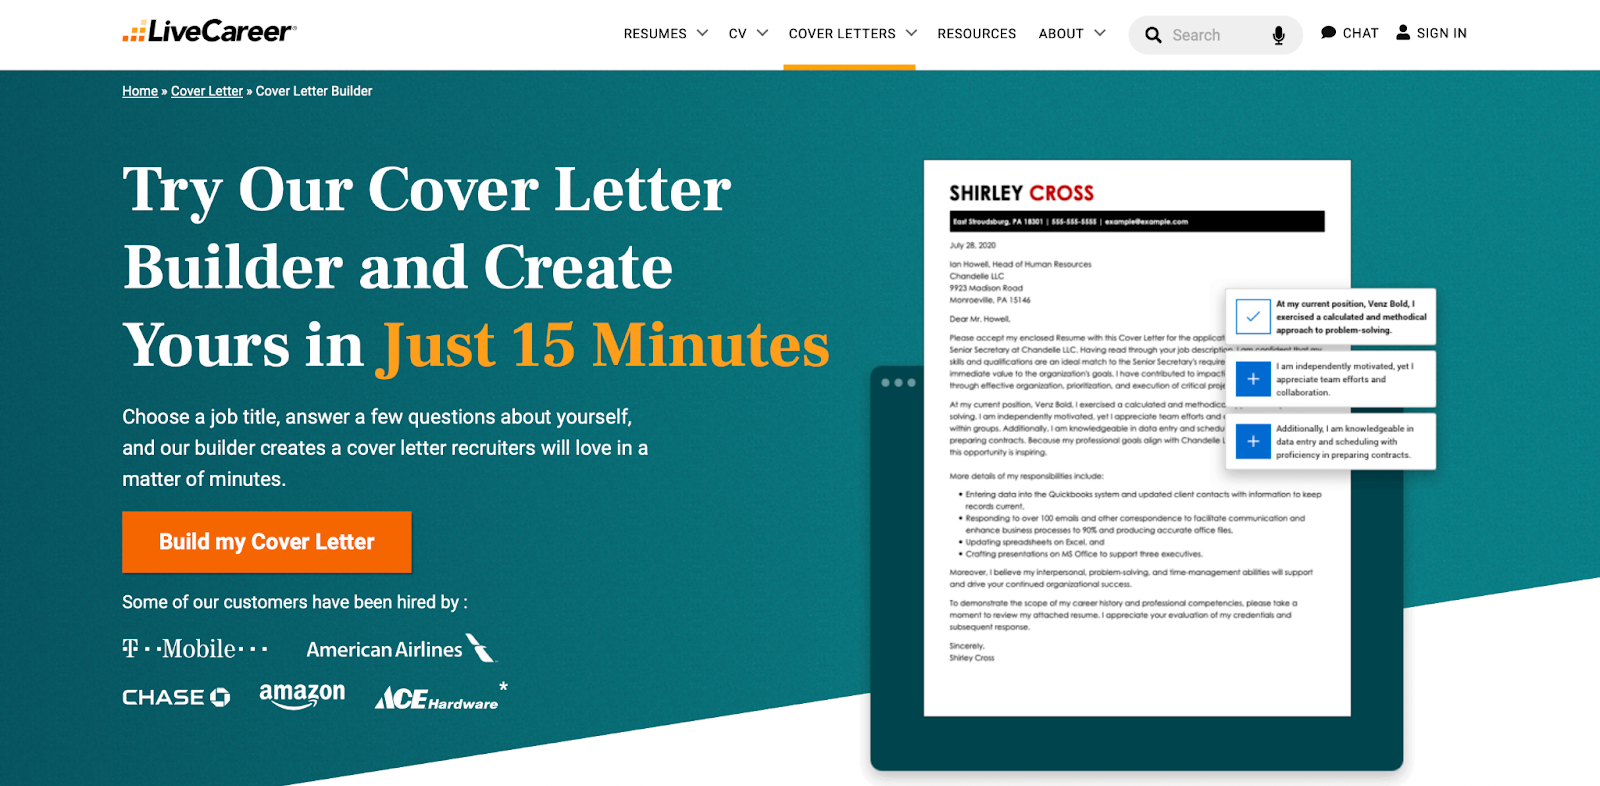 best ai cover letter writer